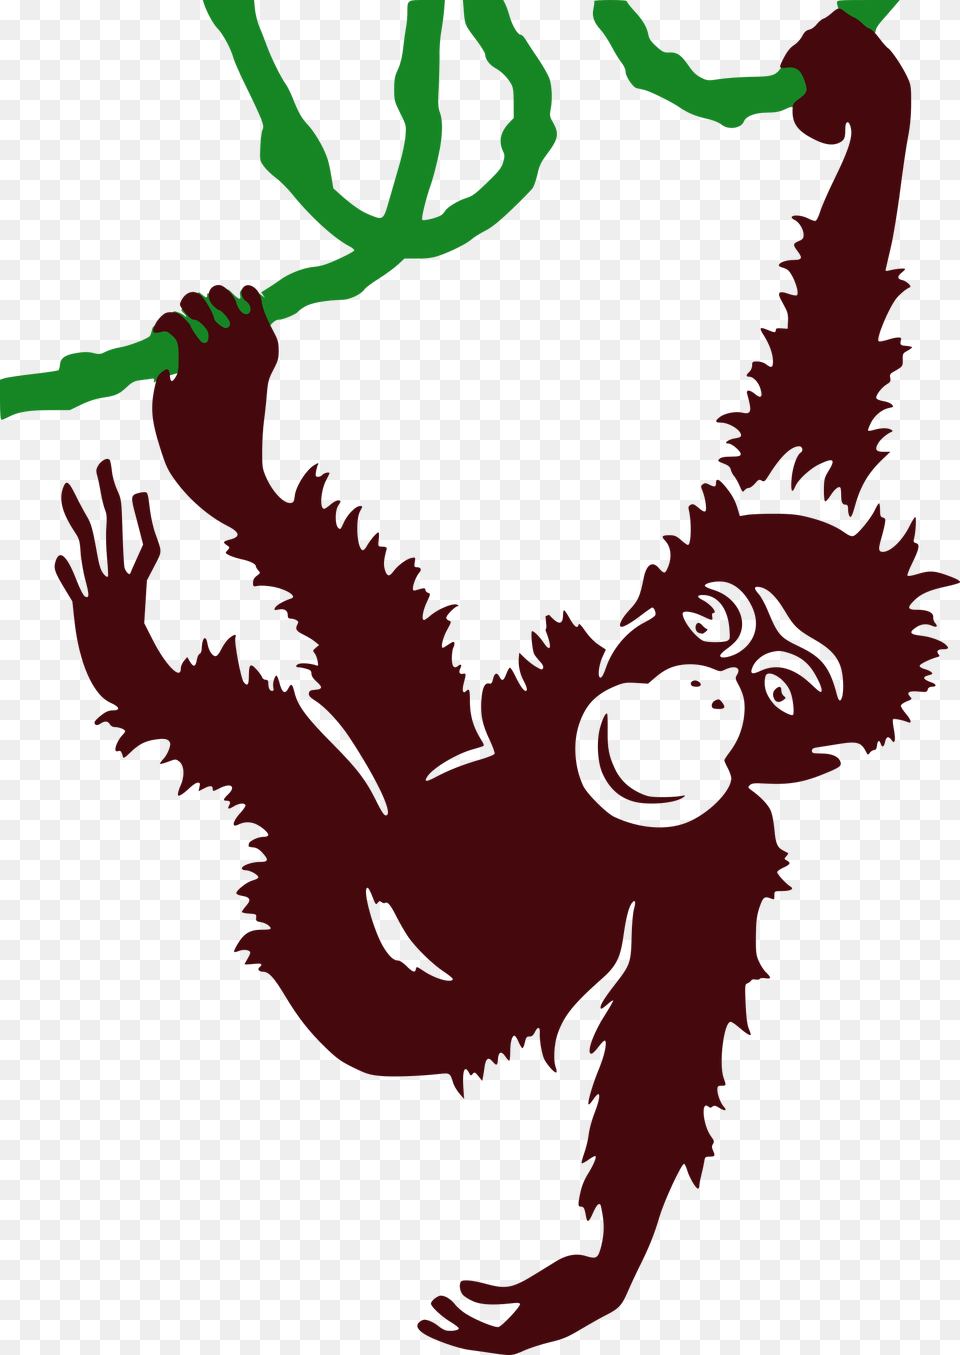 Hanging Monkey Clip Arts San Diego Zoo Poster, Baby, Person, Animal, Wildlife Png